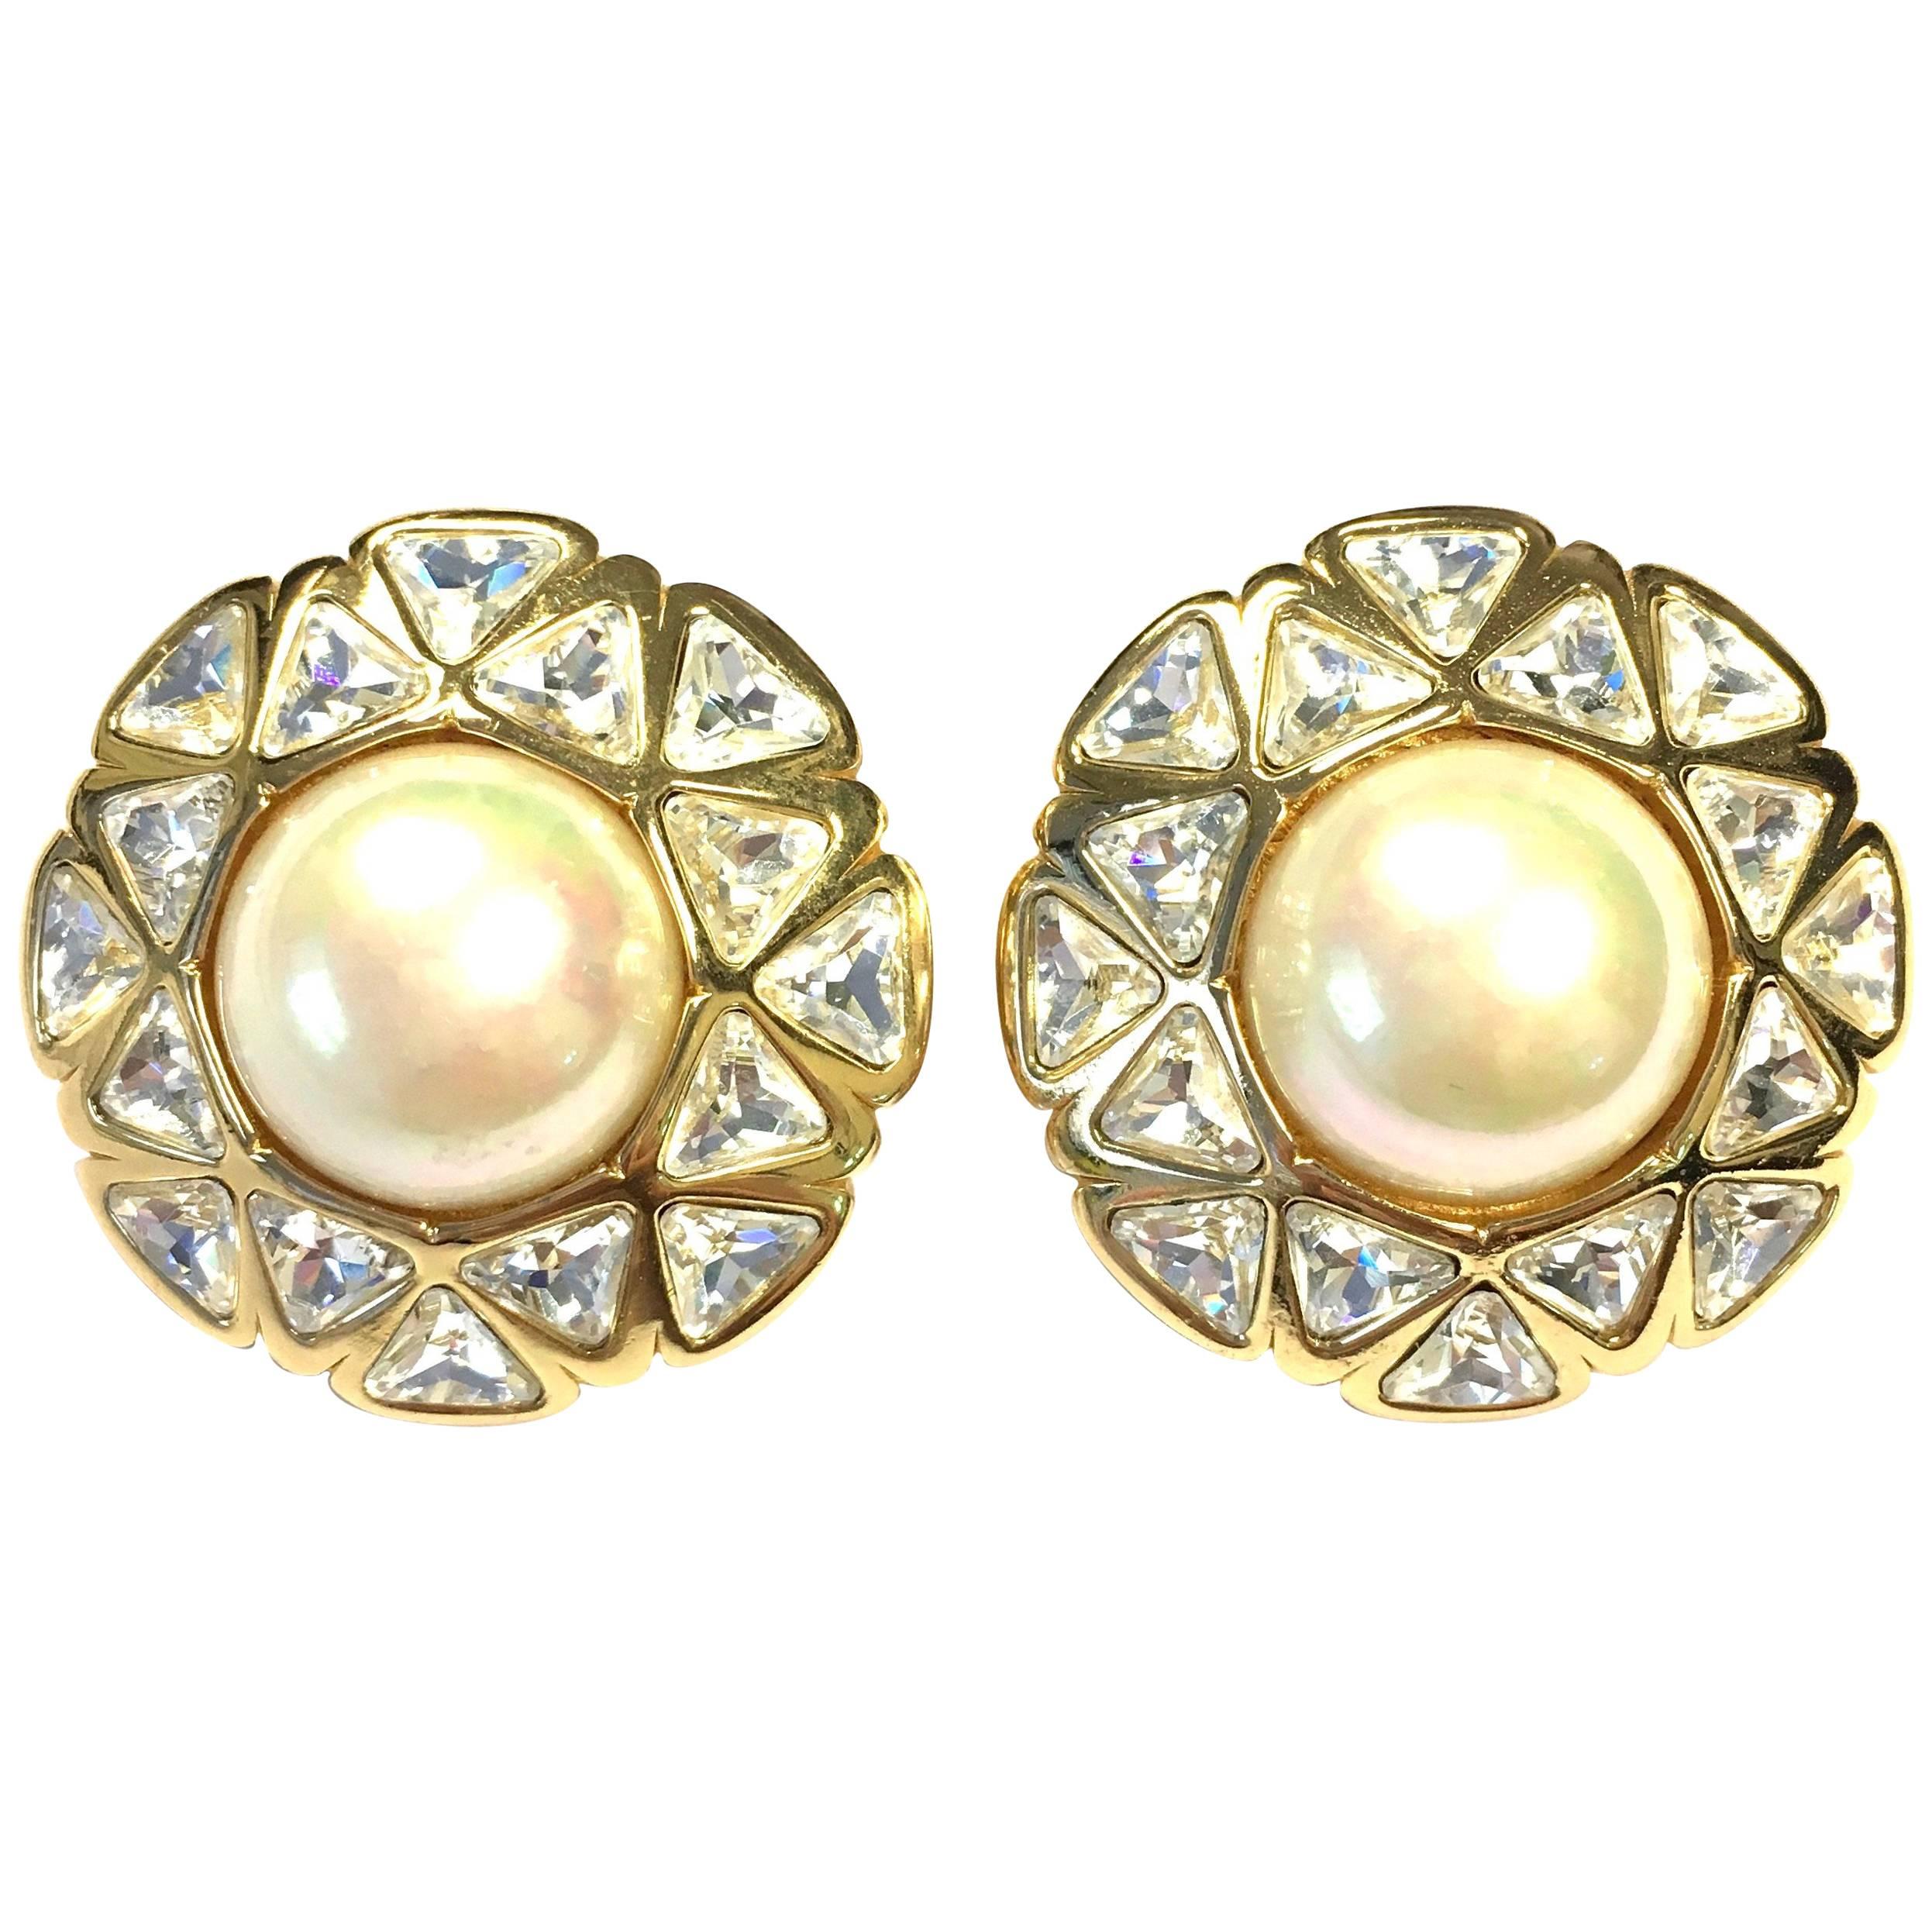 Christian Dior Vintage Large Domed Clip-On Earrings